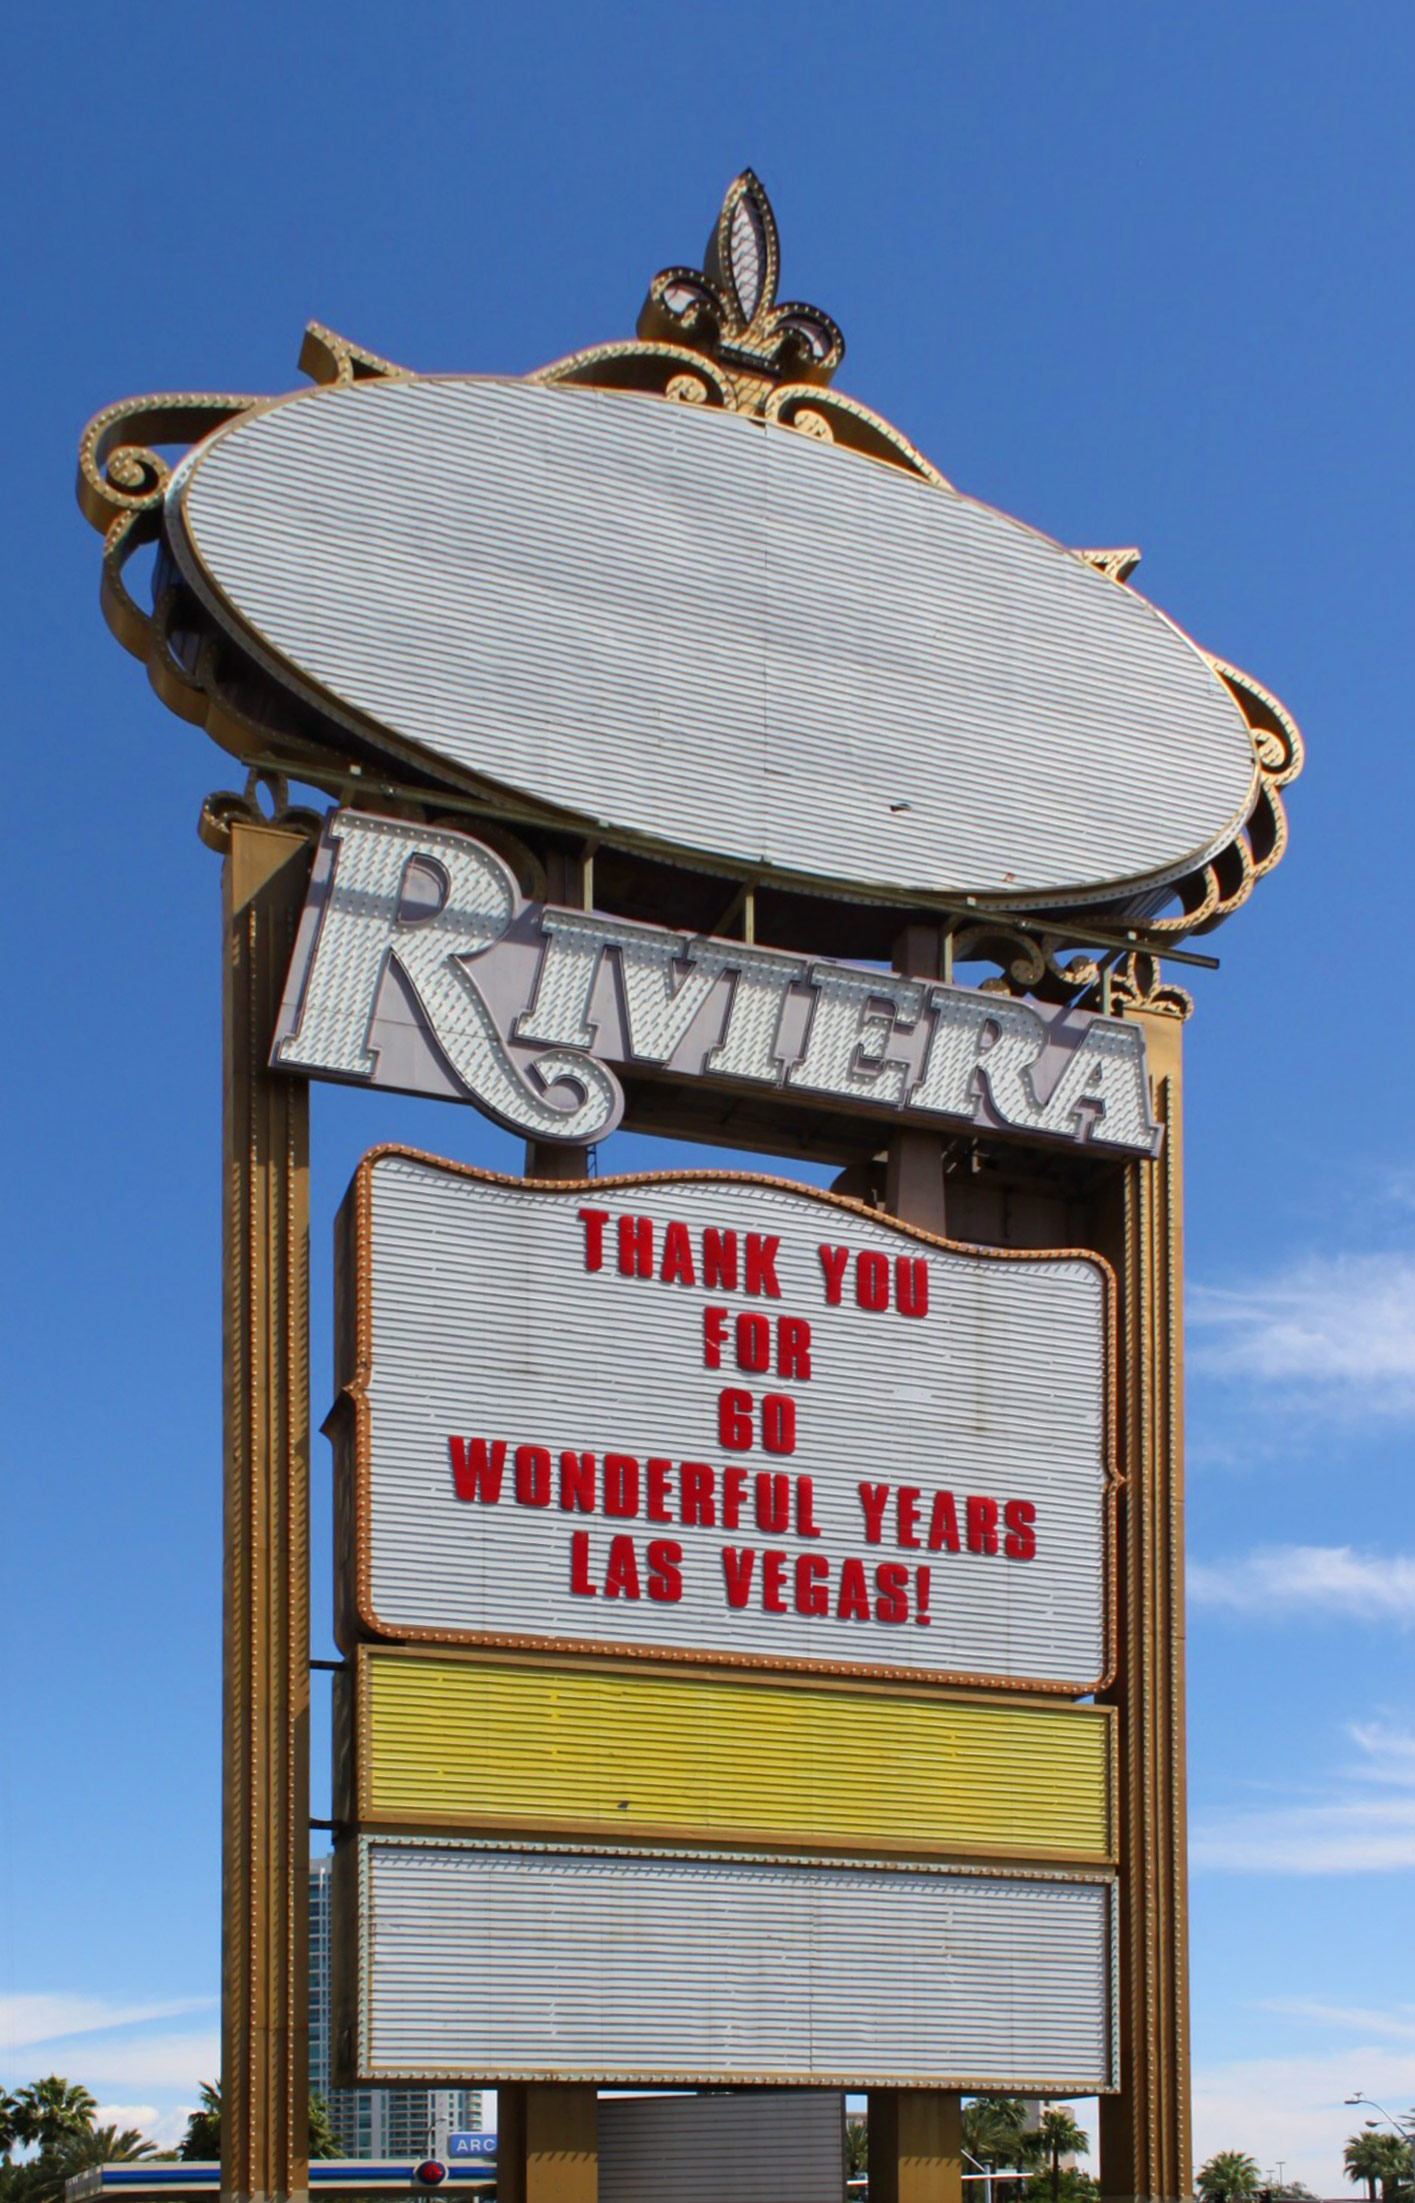 Riviera ends 60 years on Strip, closes for good, Casinos & Gaming